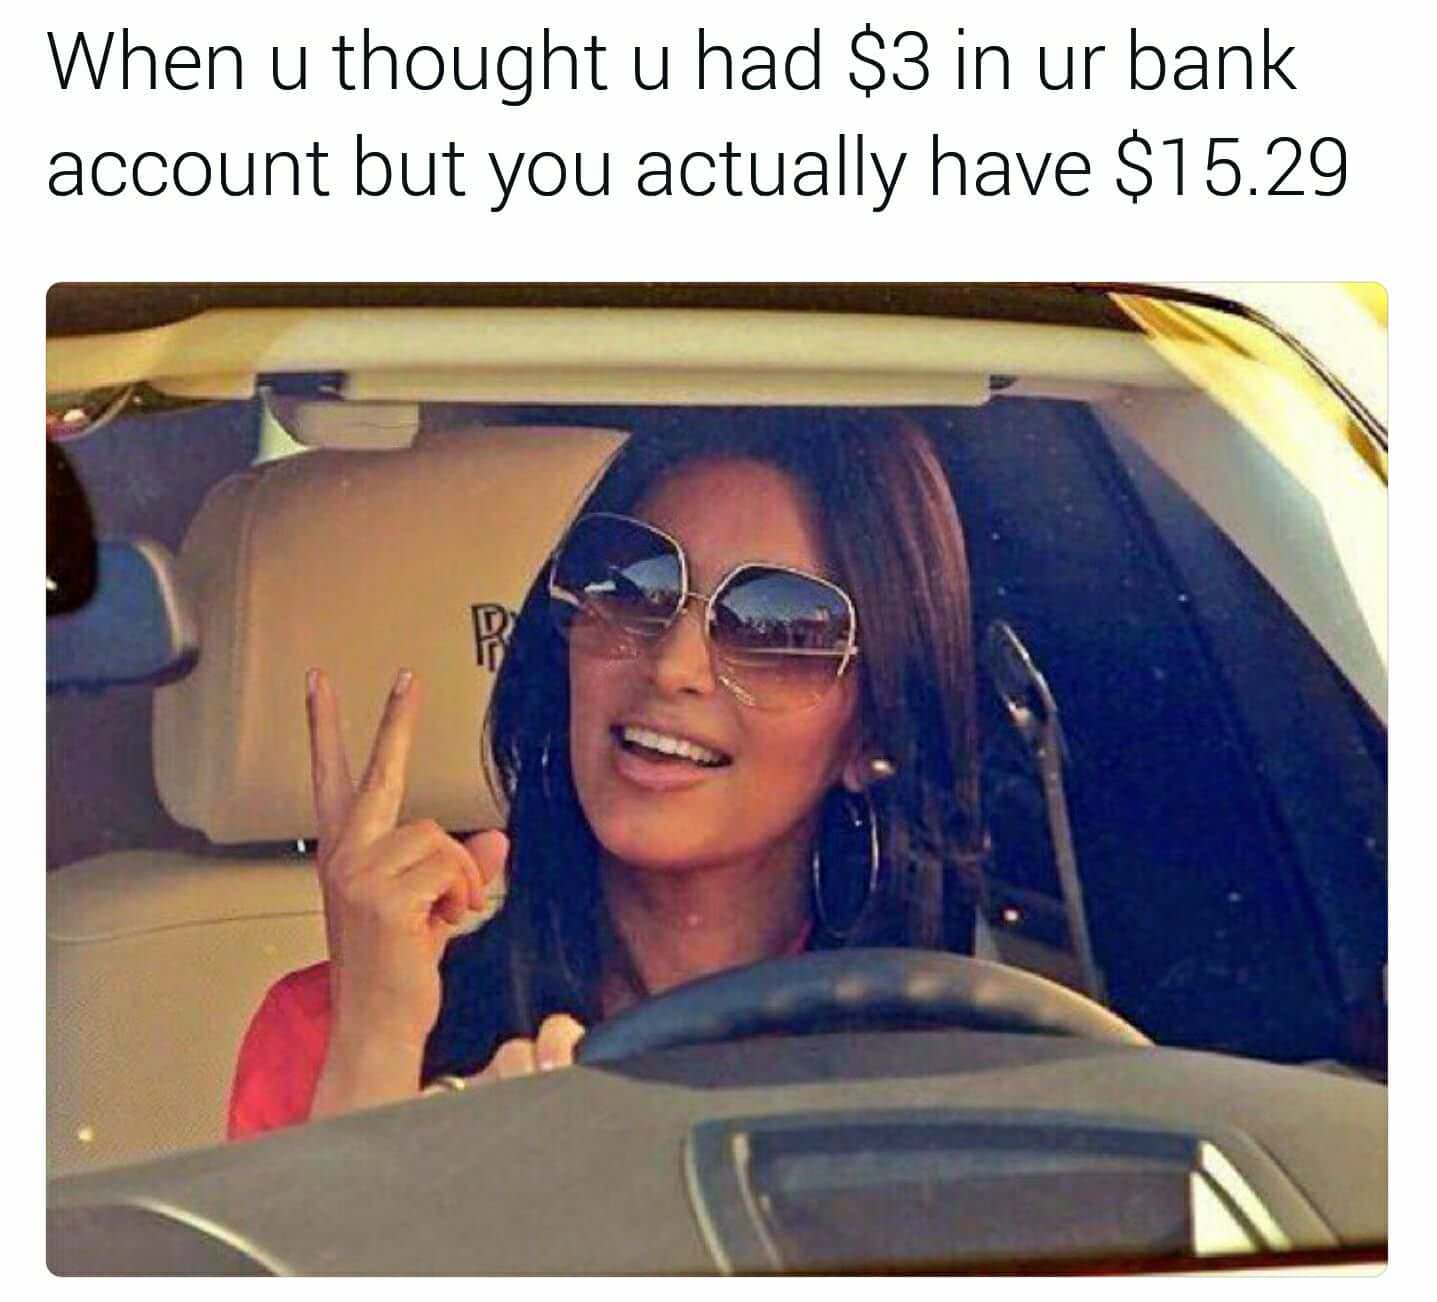 woman glowing meme - When u thought u had $3 in ur bank account but you actually have $15.29